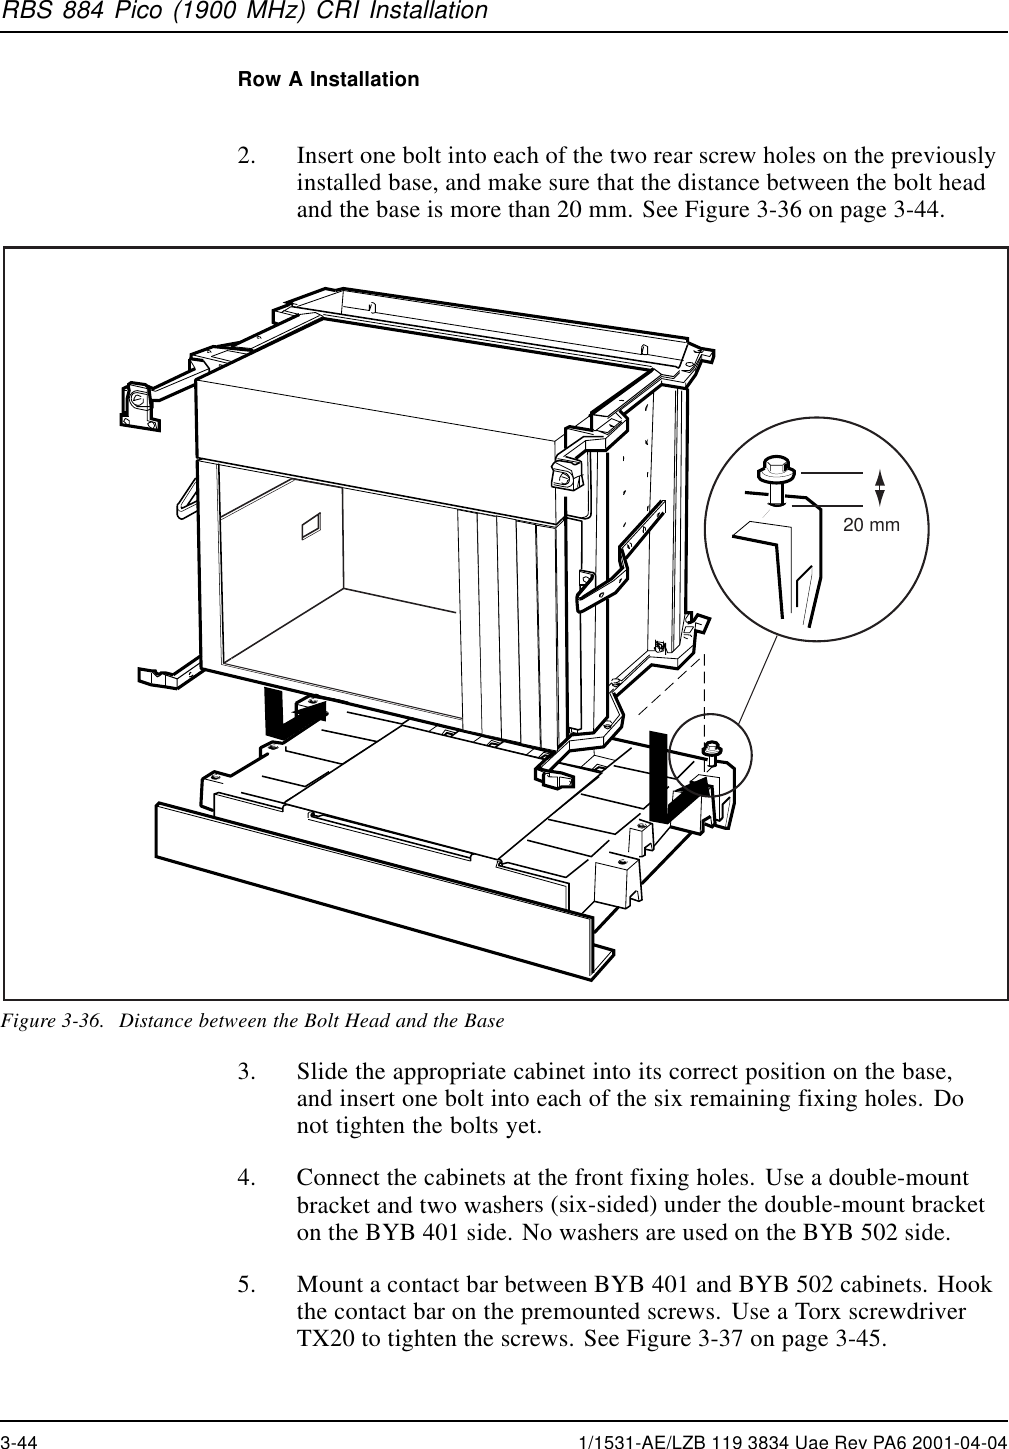 RBS 884 Pico (1900 MHz) CRI InstallationRow A Installation2. Insert one bolt into each of the two rear screw holes on the previouslyinstalled base, and make sure that the distance between the bolt headand the base is more than 20 mm. See Figure 3-36 on page 3-44.20 mmFigure 3-36. Distance between the Bolt Head and the Base3. Slide the appropriate cabinet into its correct position on the base,and insert one bolt into each of the six remaining fixing holes. Donot tighten the bolts yet.4. Connect the cabinets at the front fixing holes. Use a double-mountbracket and two washers (six-sided) under the double-mount bracketon the BYB 401 side. No washers are used on the BYB 502 side.5. Mount a contact bar between BYB 401 and BYB 502 cabinets. Hookthe contact bar on the premounted screws. Use a Torx screwdriverTX20 to tighten the screws. See Figure 3-37 on page 3-45.3-44 1/1531-AE/LZB 119 3834 Uae Rev PA6 2001-04-04